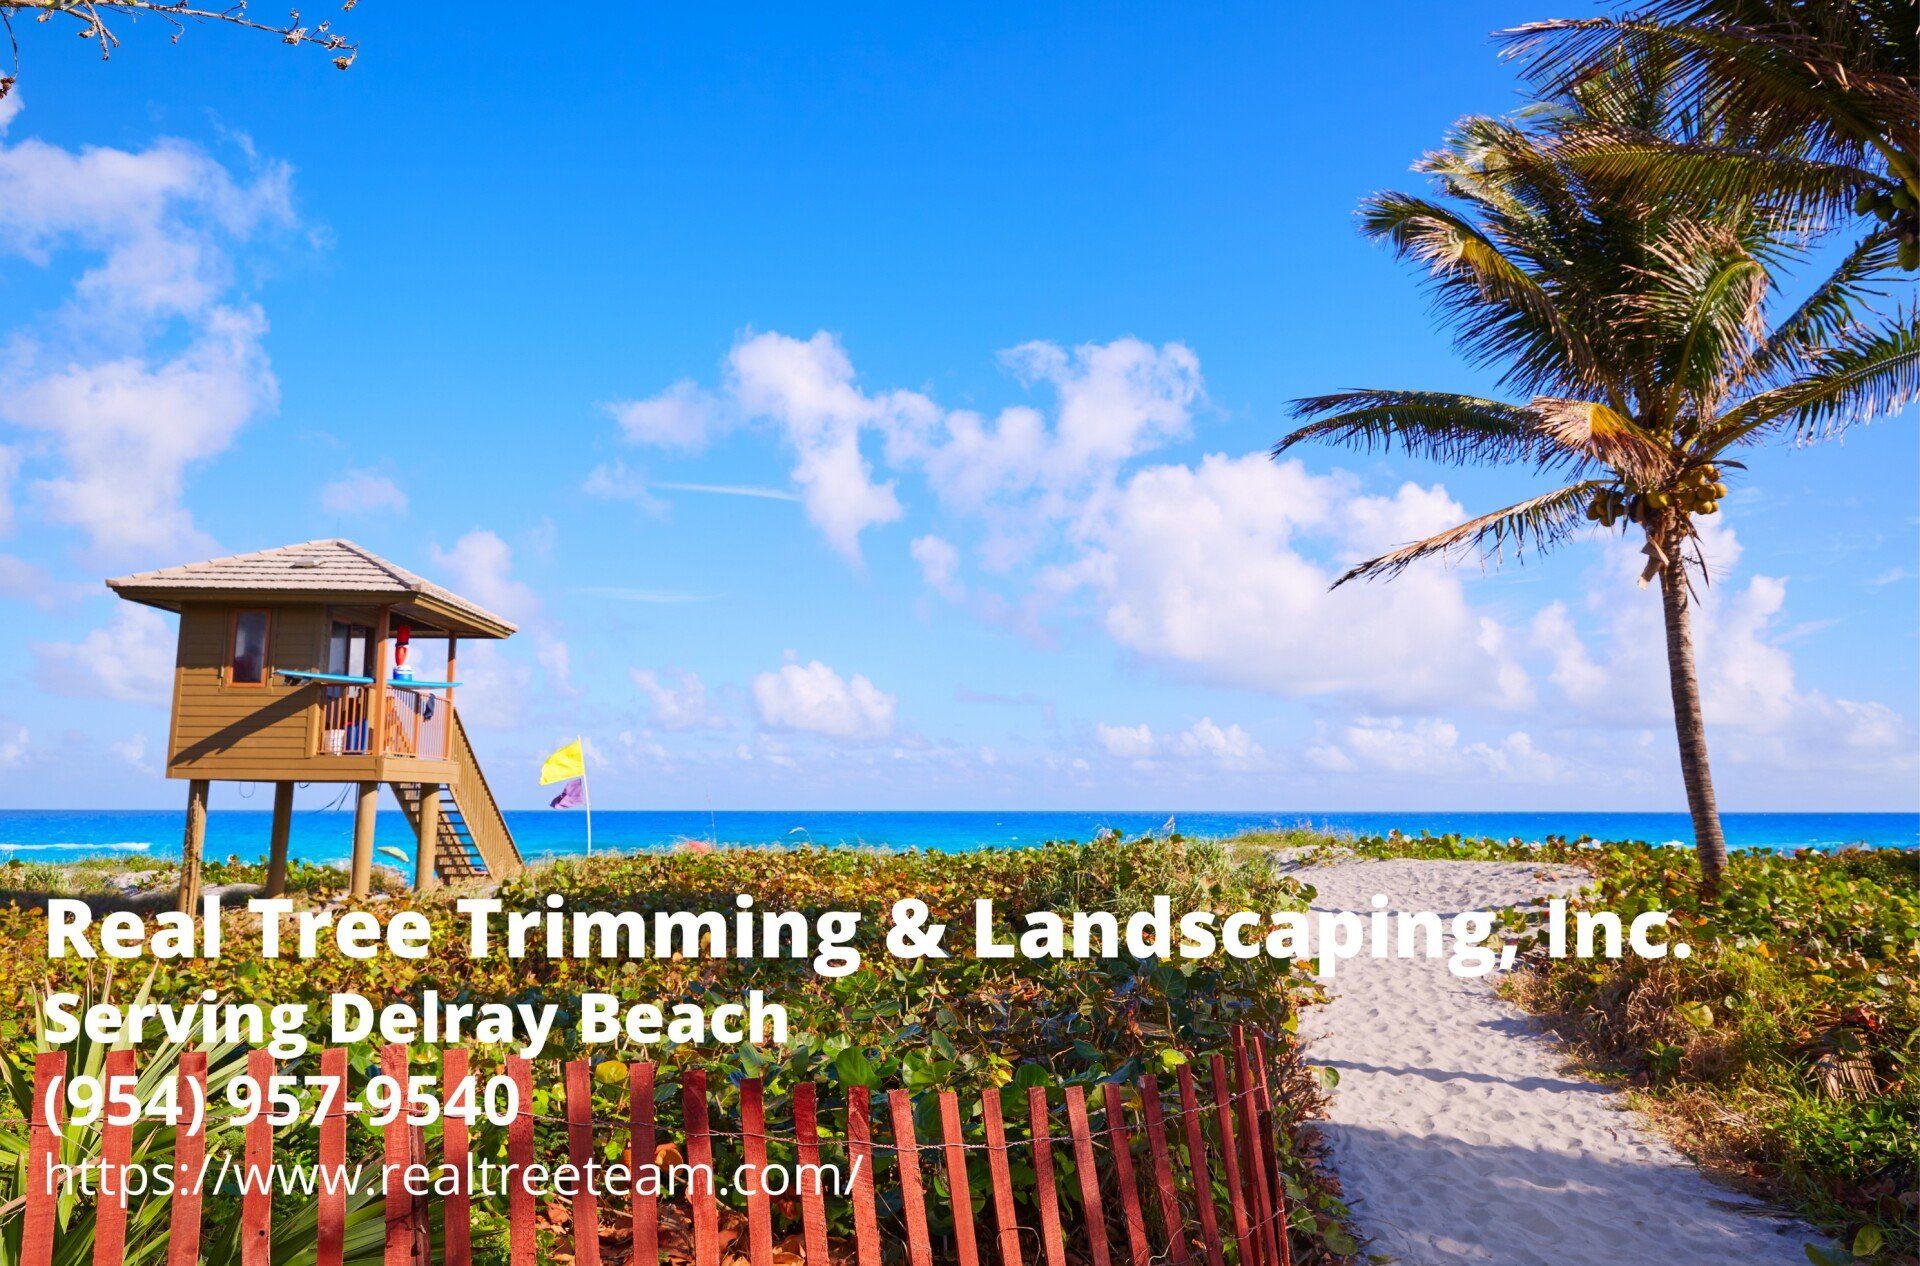 The Famous Delray Beach. Text by Real Tree Team - a tree company serving the Delray Beach area